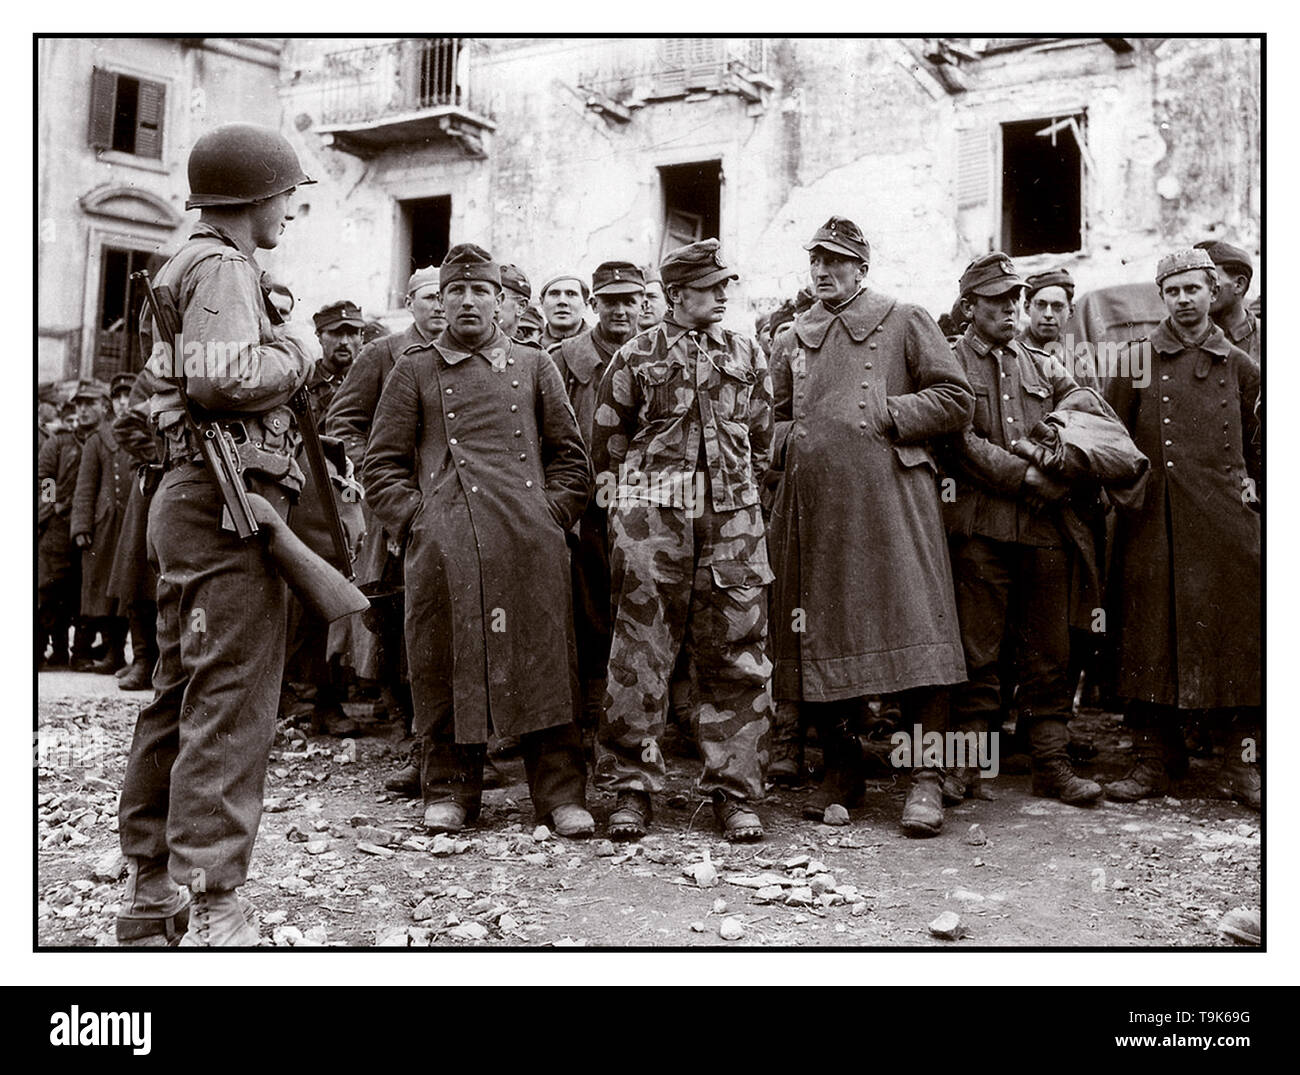 WW2 Archive German Army Prisoners World War II Disparate group of uniformed Wehrmacht German army prisoners being guarded by a young American GI soldier at Anzio Italy 1944 Stock Photo